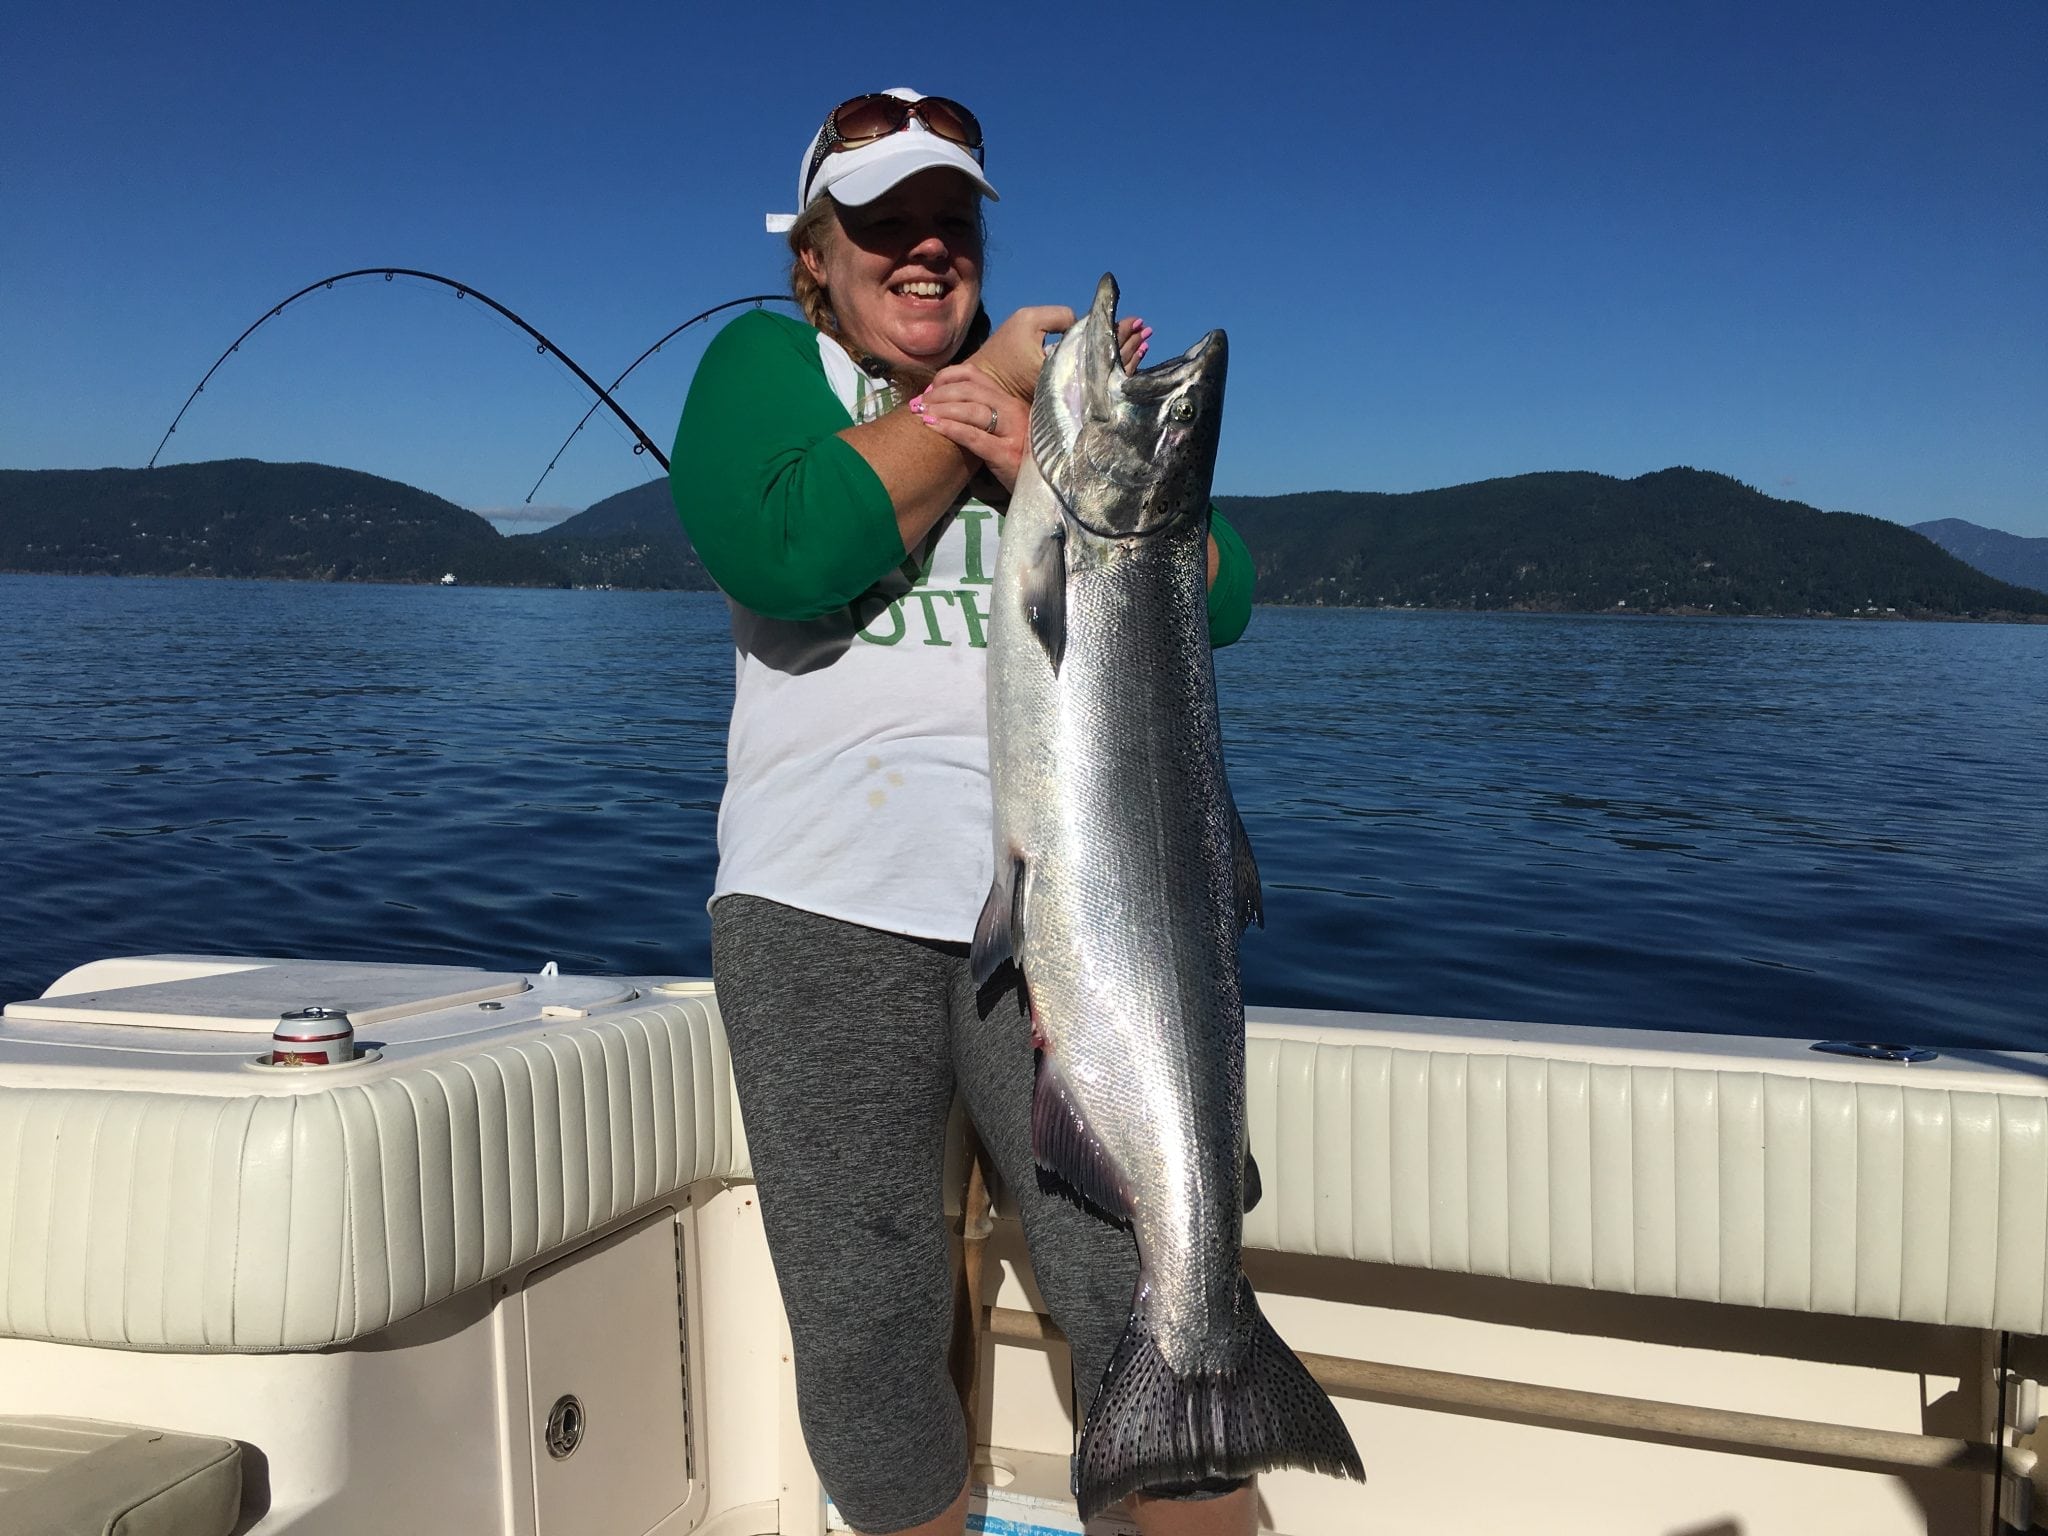 Shannon landed this 26-pound salmon in Vancouver waters